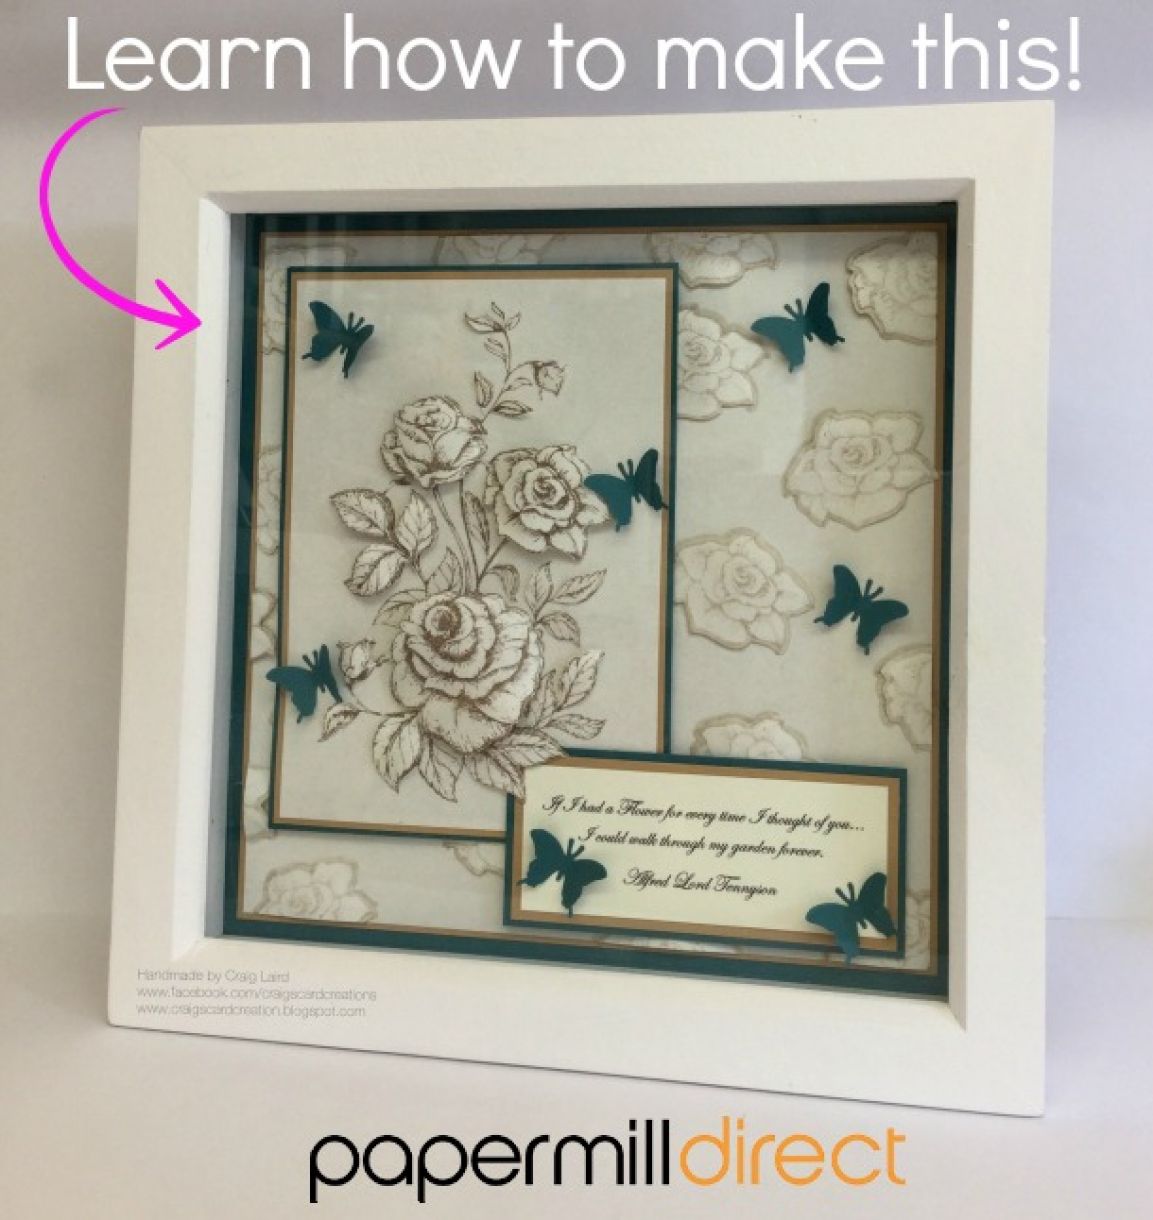 How To Make A Decoupage Gift Frame